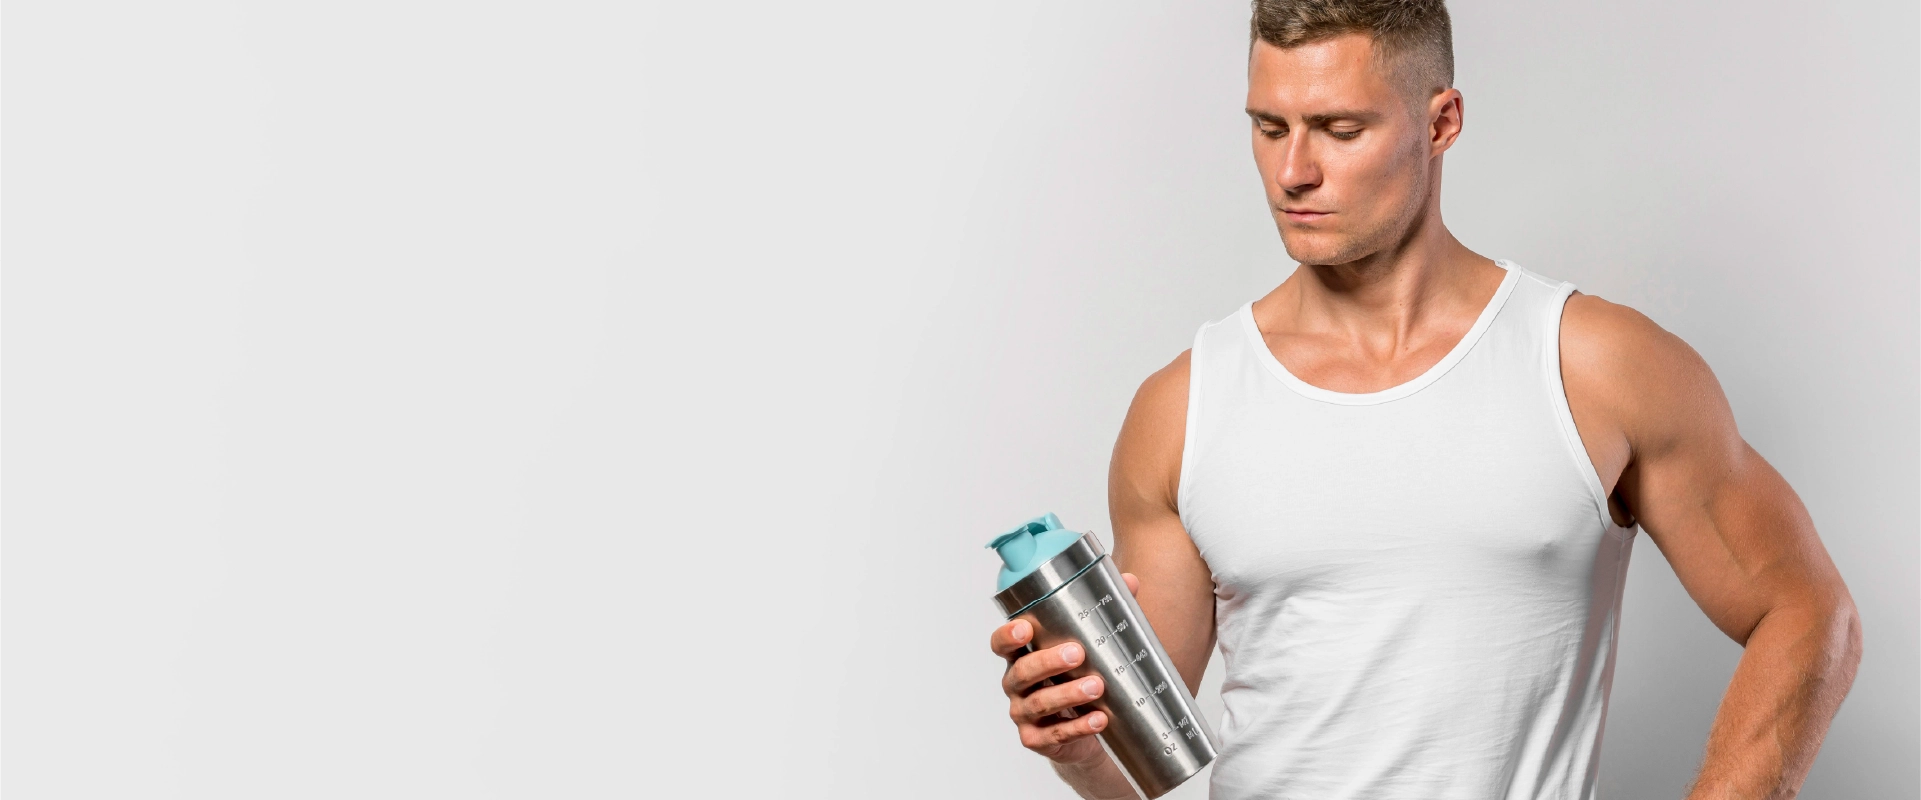 Should You Take Pre Workout Supplements to Energize